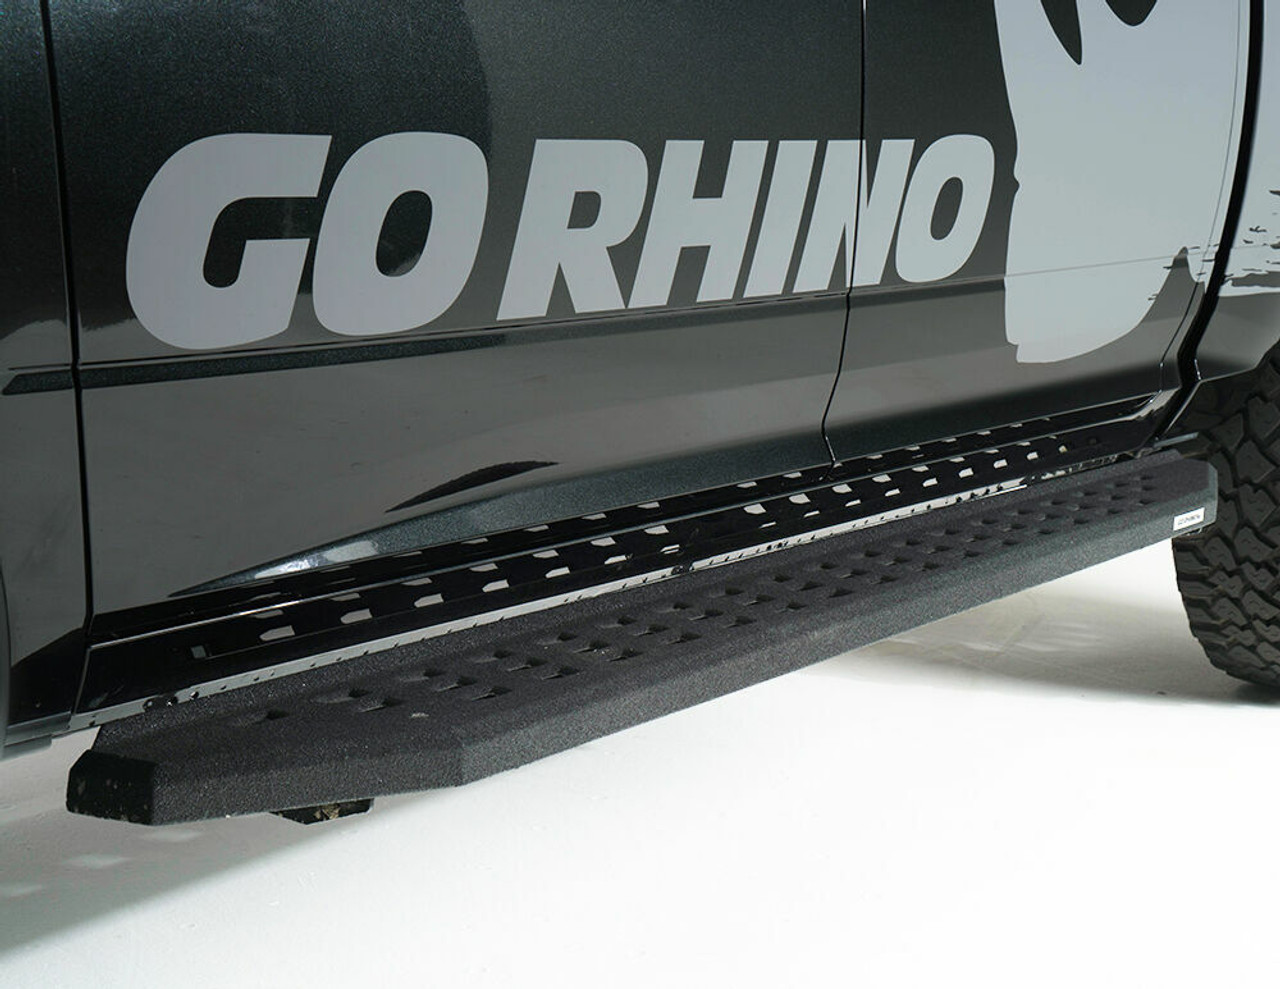 Go Rhino 6942358020PC Chevrolet, Colorado, 2015 - 2021, RB20 Running boards - Complete Kit:  2 pair RB20 Drop Steps, Galvanized Steel, Textured black, 69400080PC RB20 + 6942355 RB Brackets + (2) 69420000PC Drop Down Step